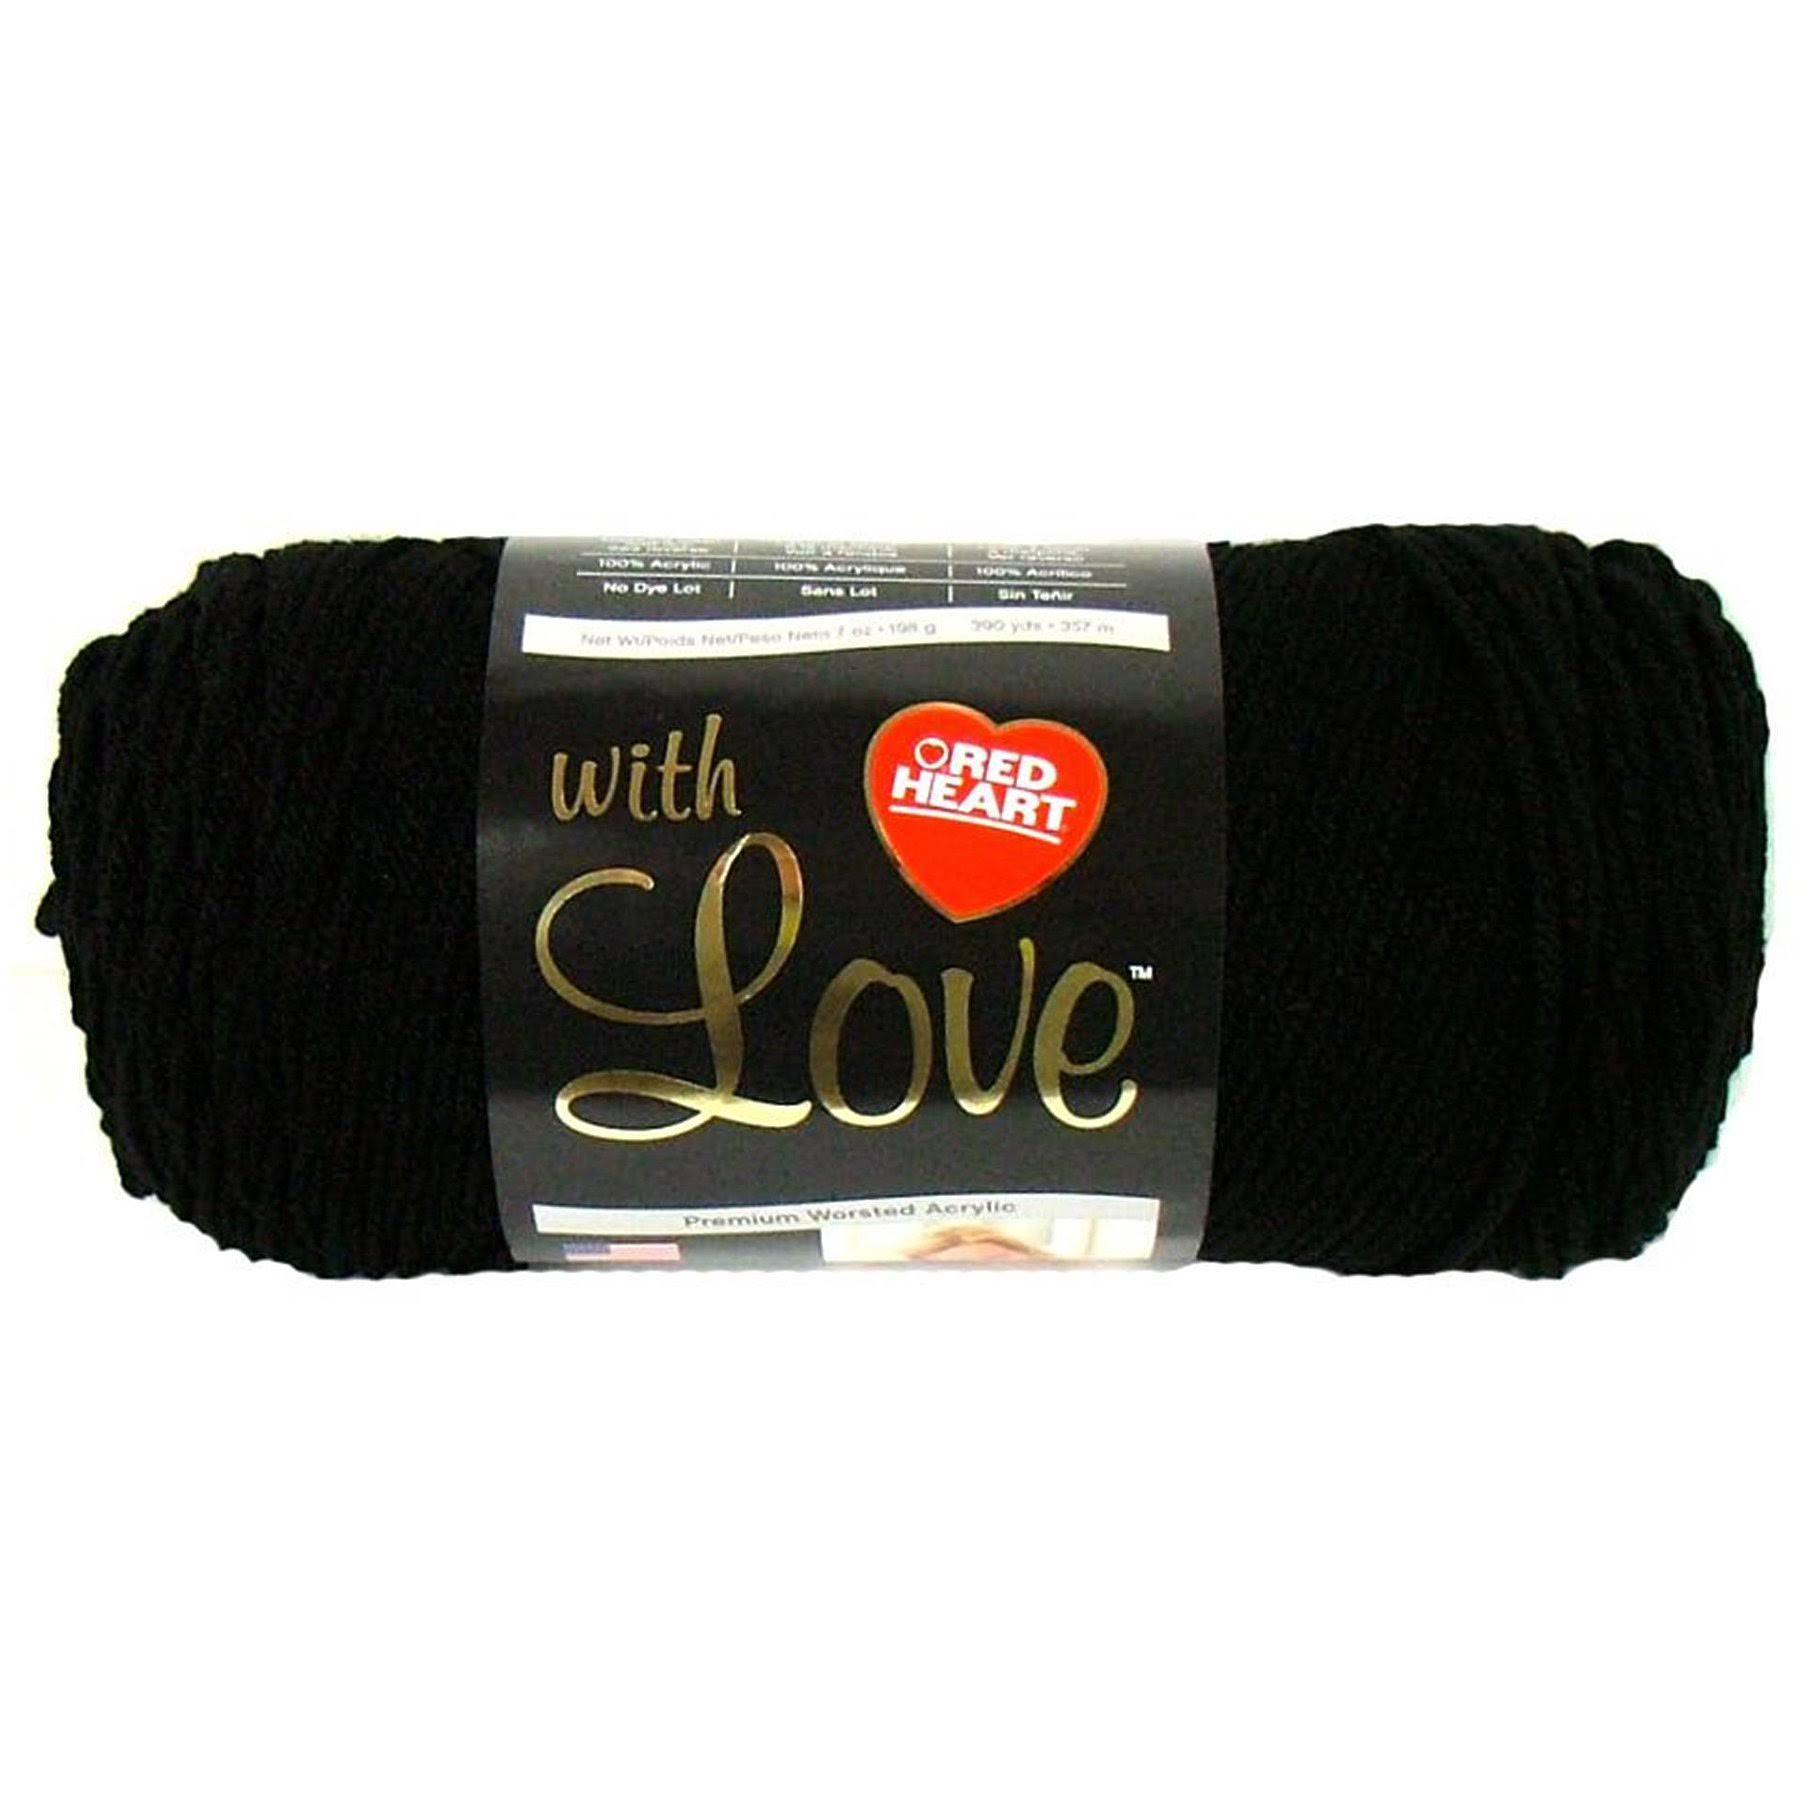 Red Heart with Love Yarn - Black